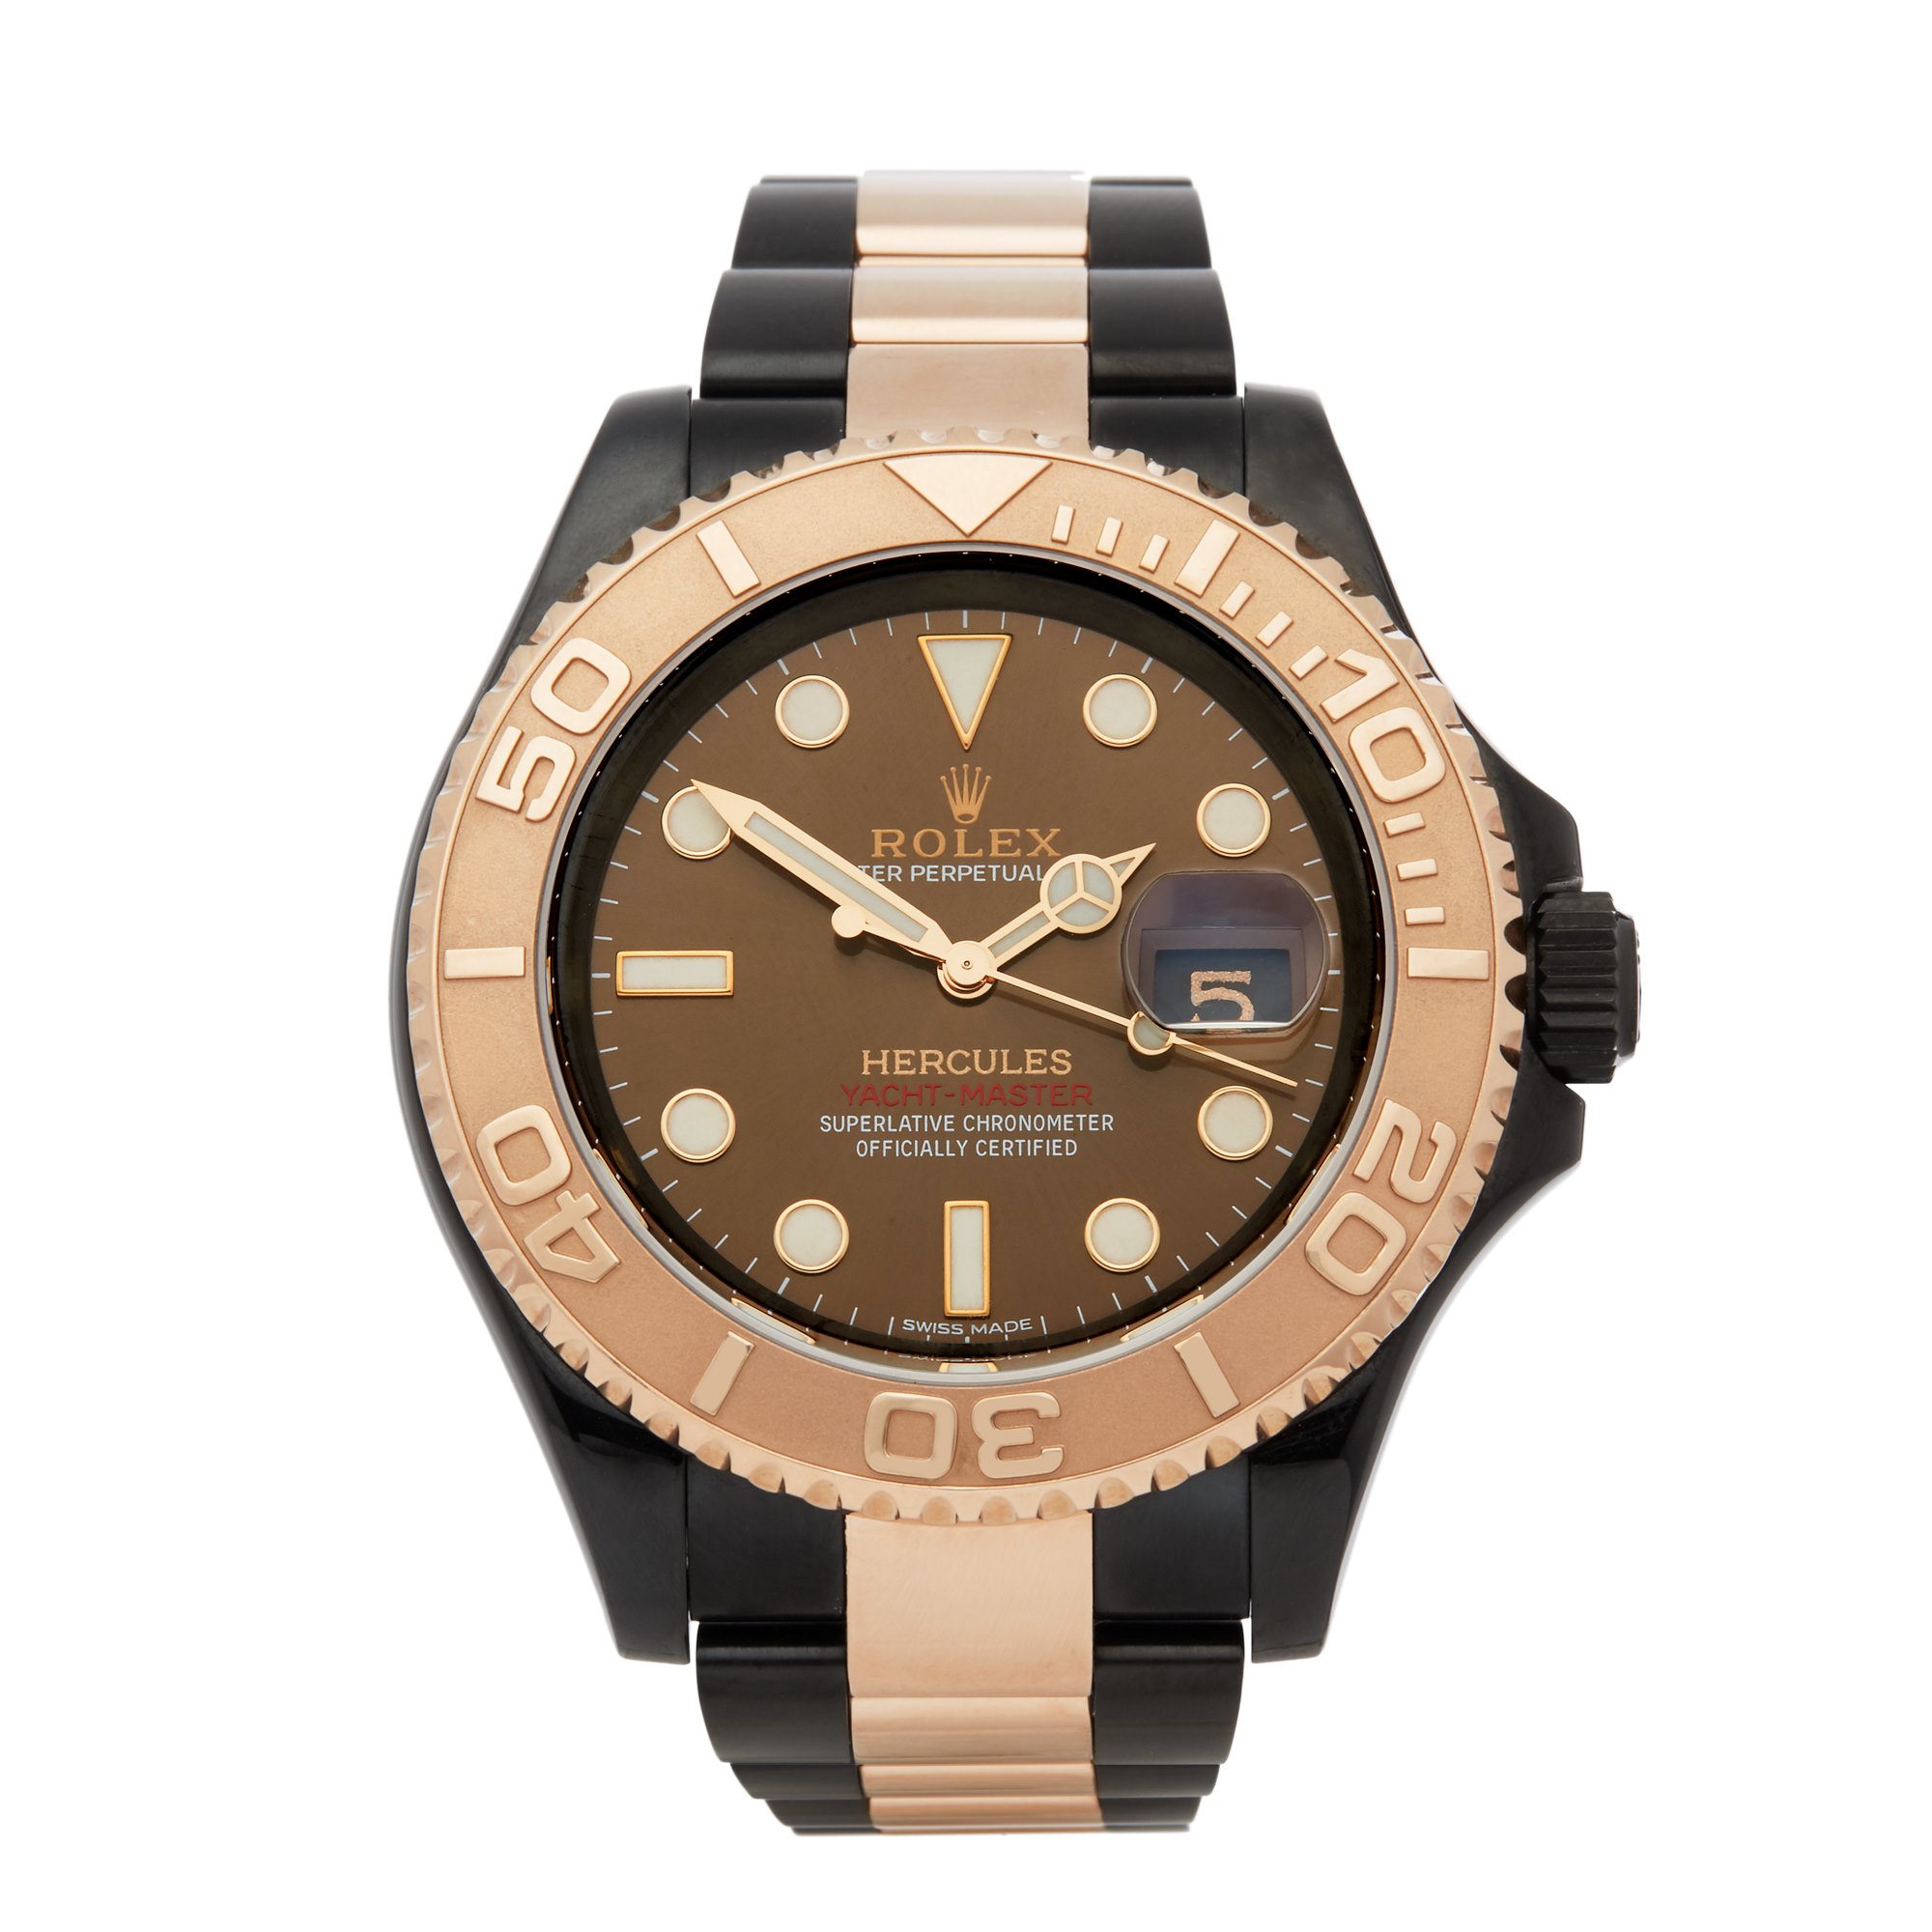 Rolex Yacht-Master Hercules Dlc Coated Stainless Steel & 18K Rose Gold 116621